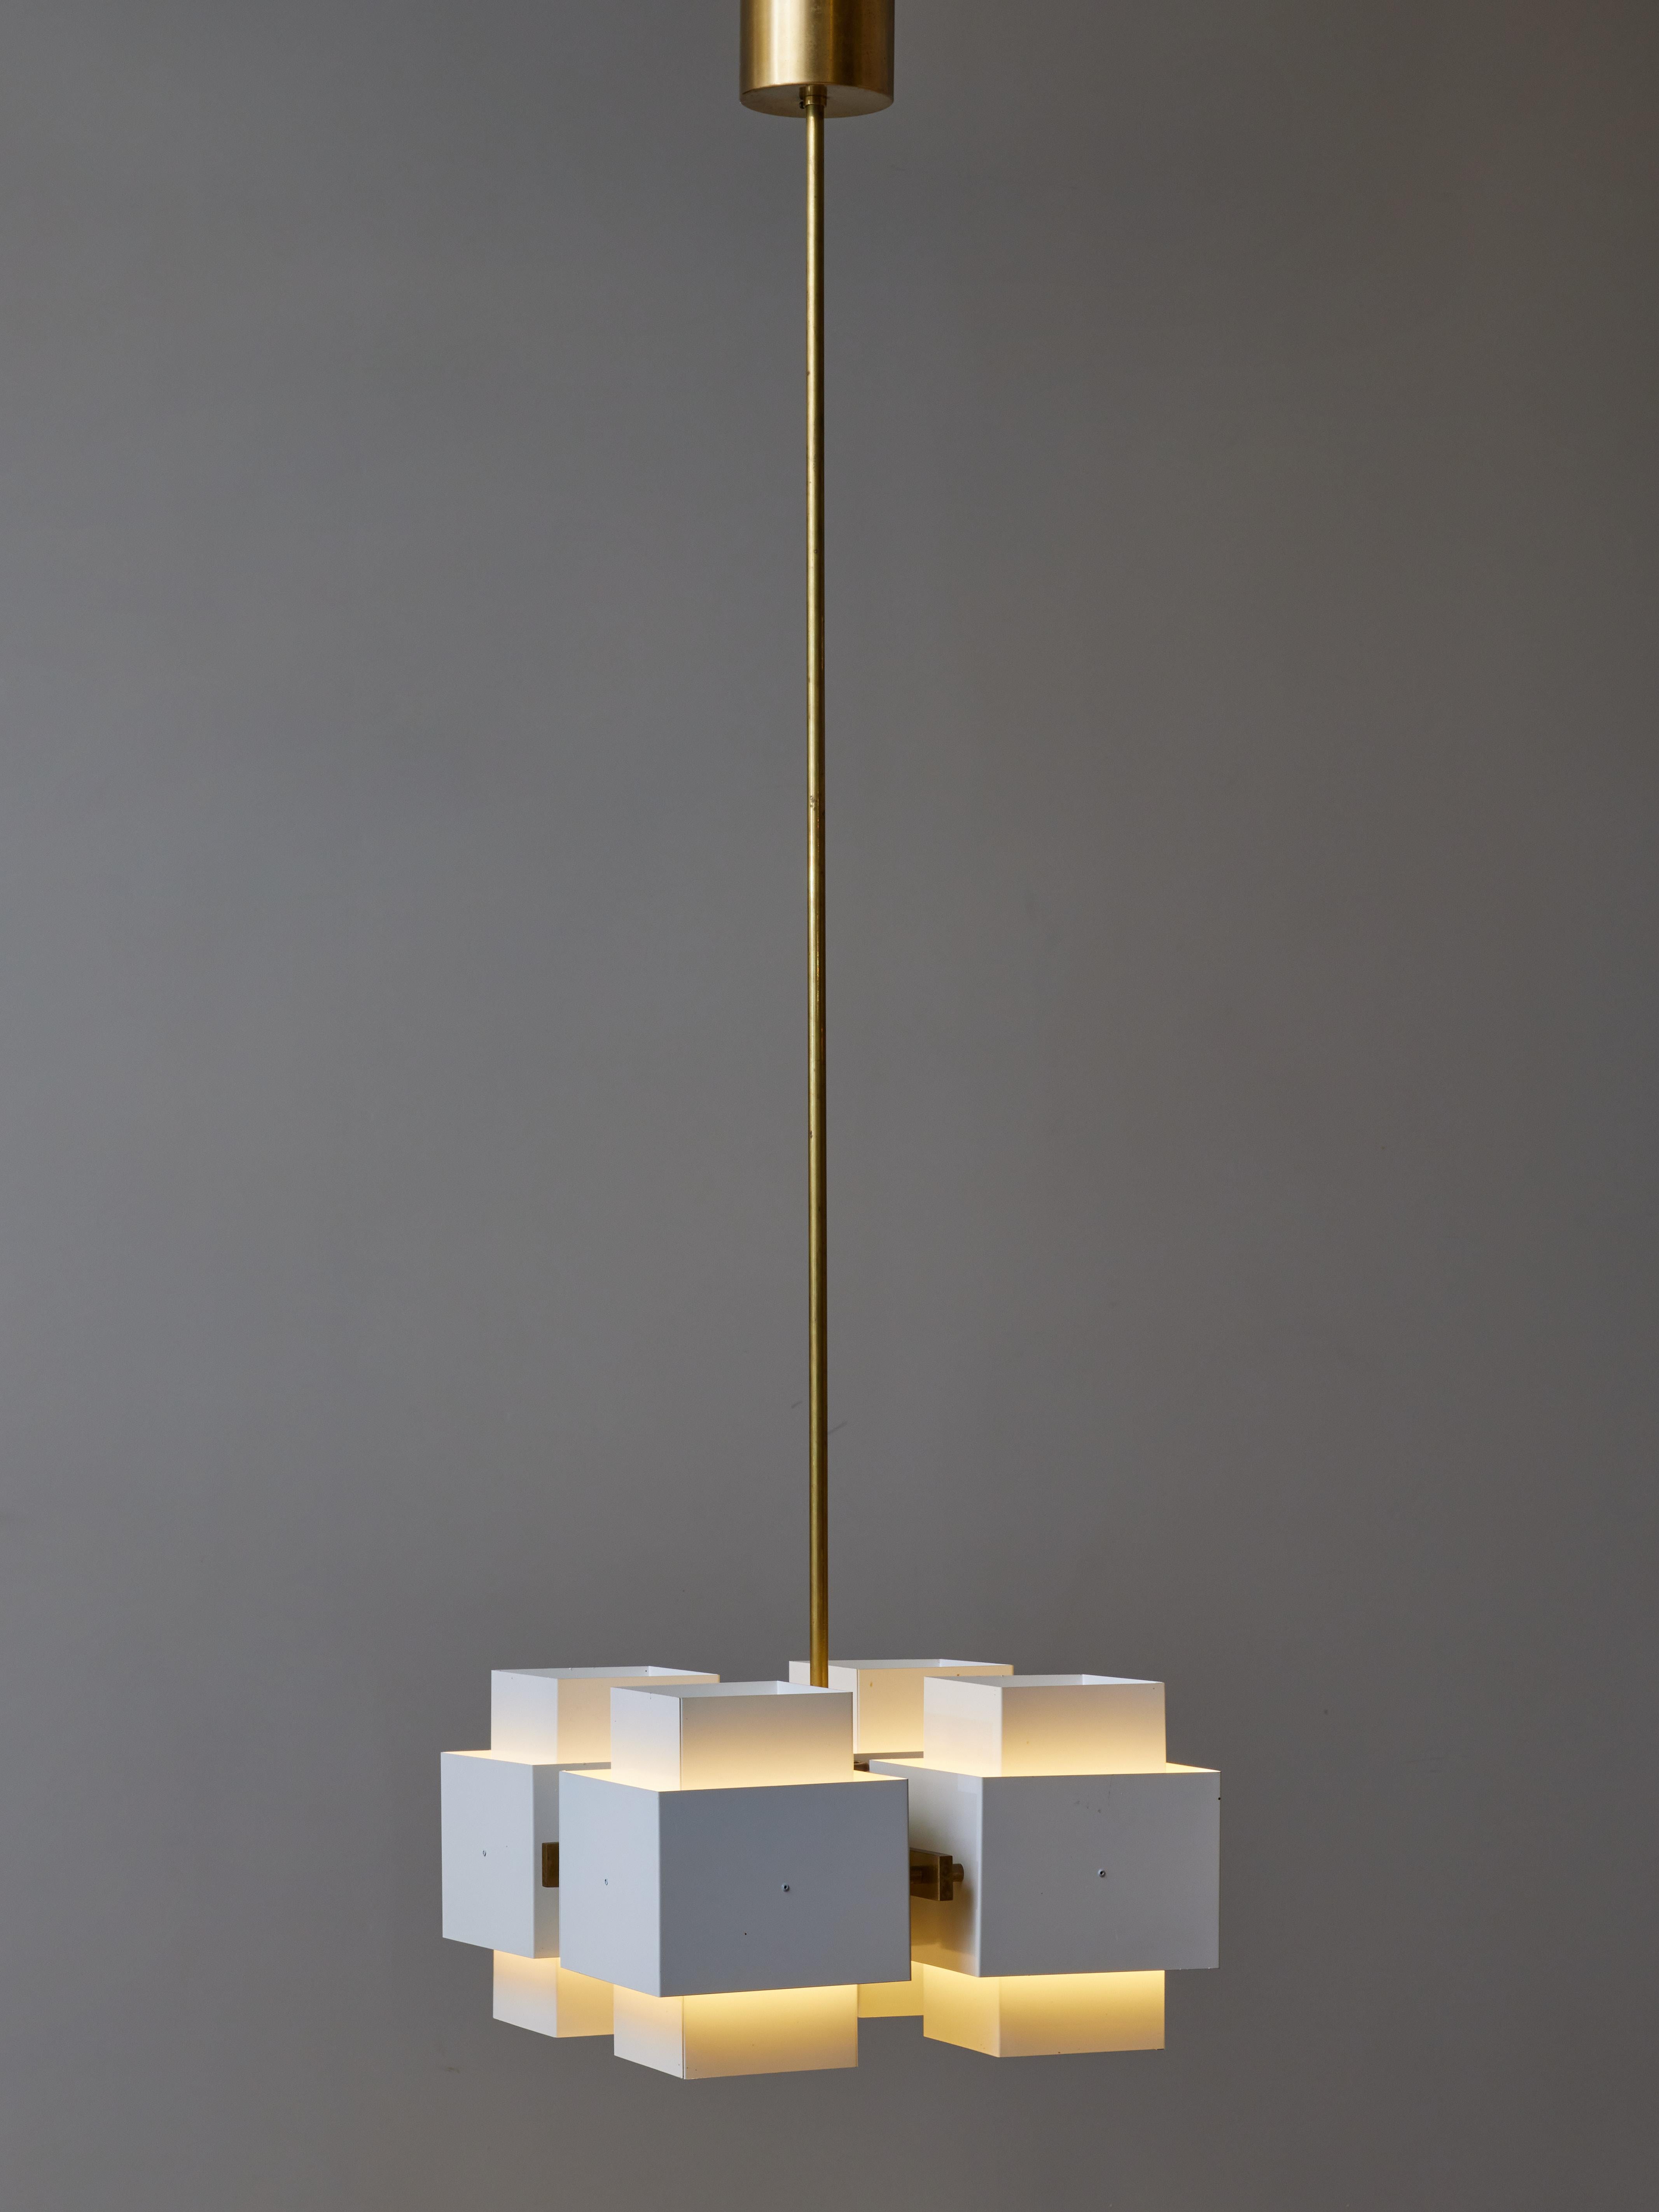 Chandelier by the Swedish lighting design master Hans Agne Jakobsson, this chandelier model 769/4 is made of four blocks of painted metal each holding one light source held together by a brass frame. Long vertical stem that can be shorten.
Original